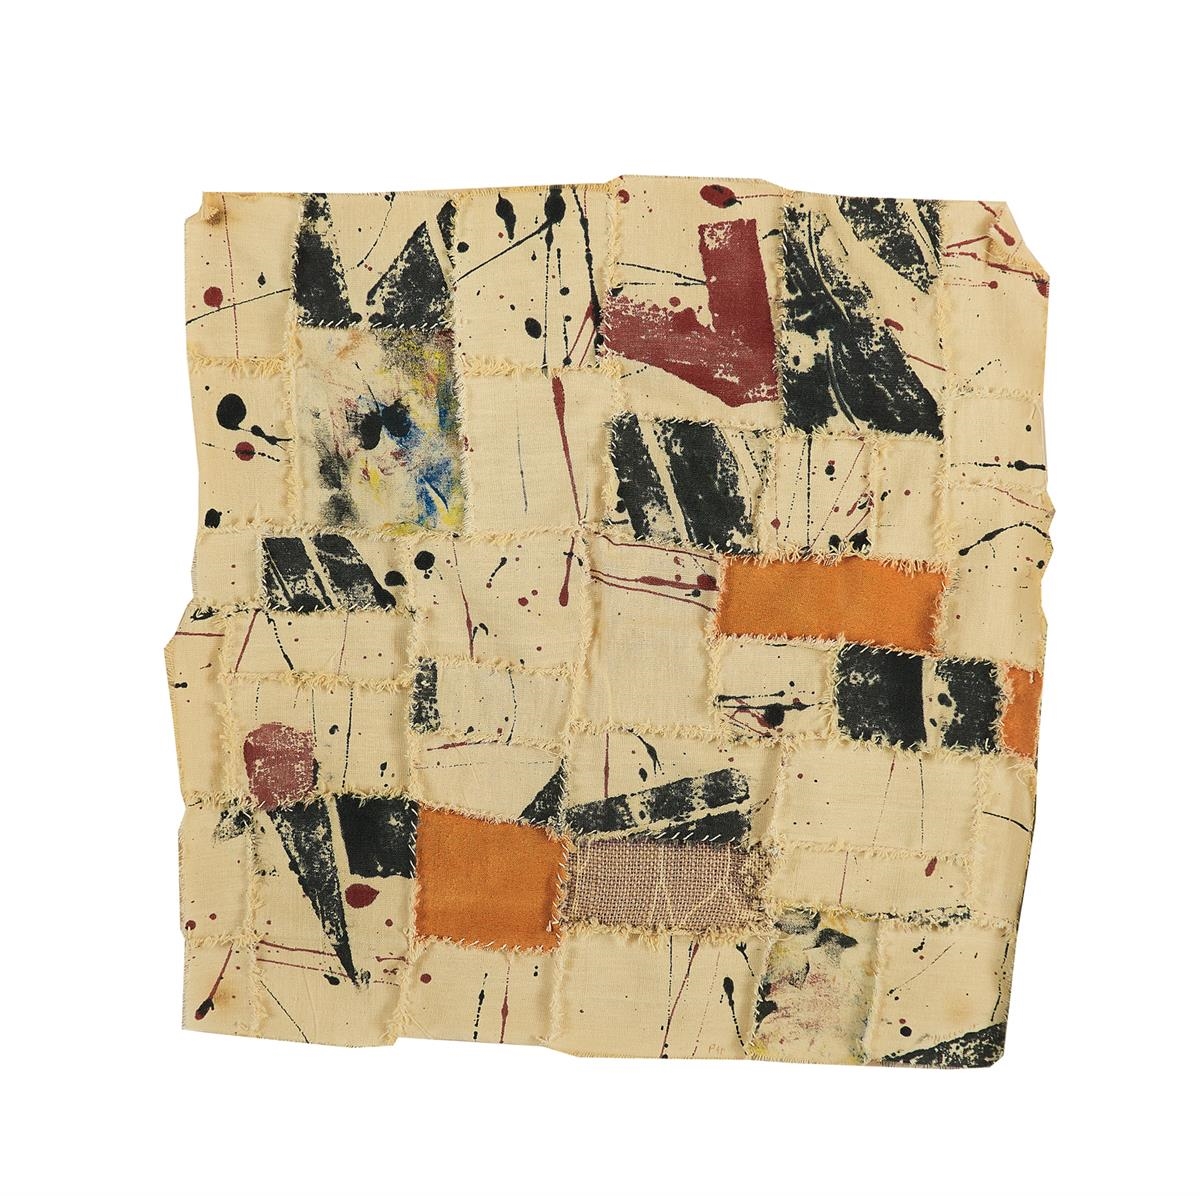 Artwork by Marcel Alocco, Patchwork No. 40, Made of hand-painted fabric/mixed media